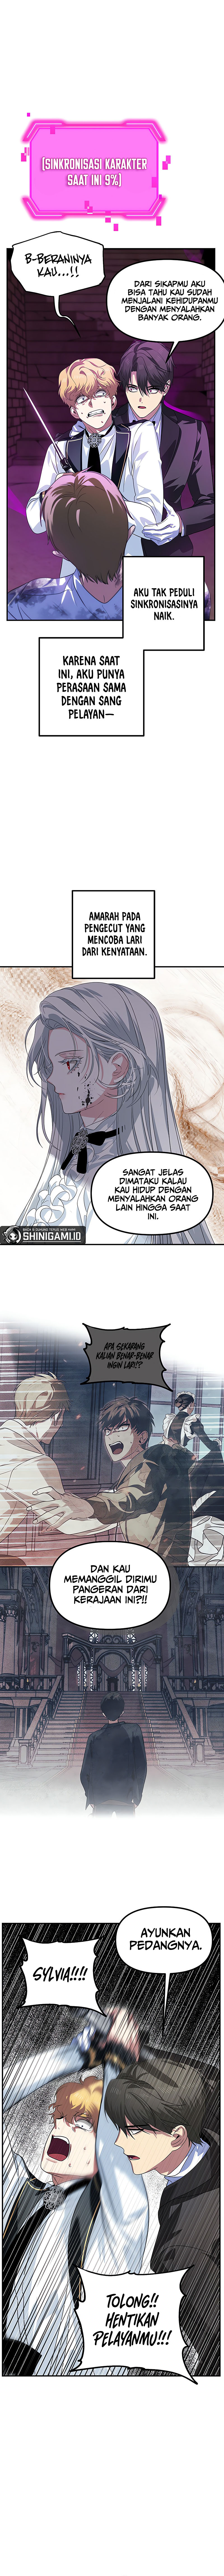 124758-sss-class-suicide-hunter Chapter 90